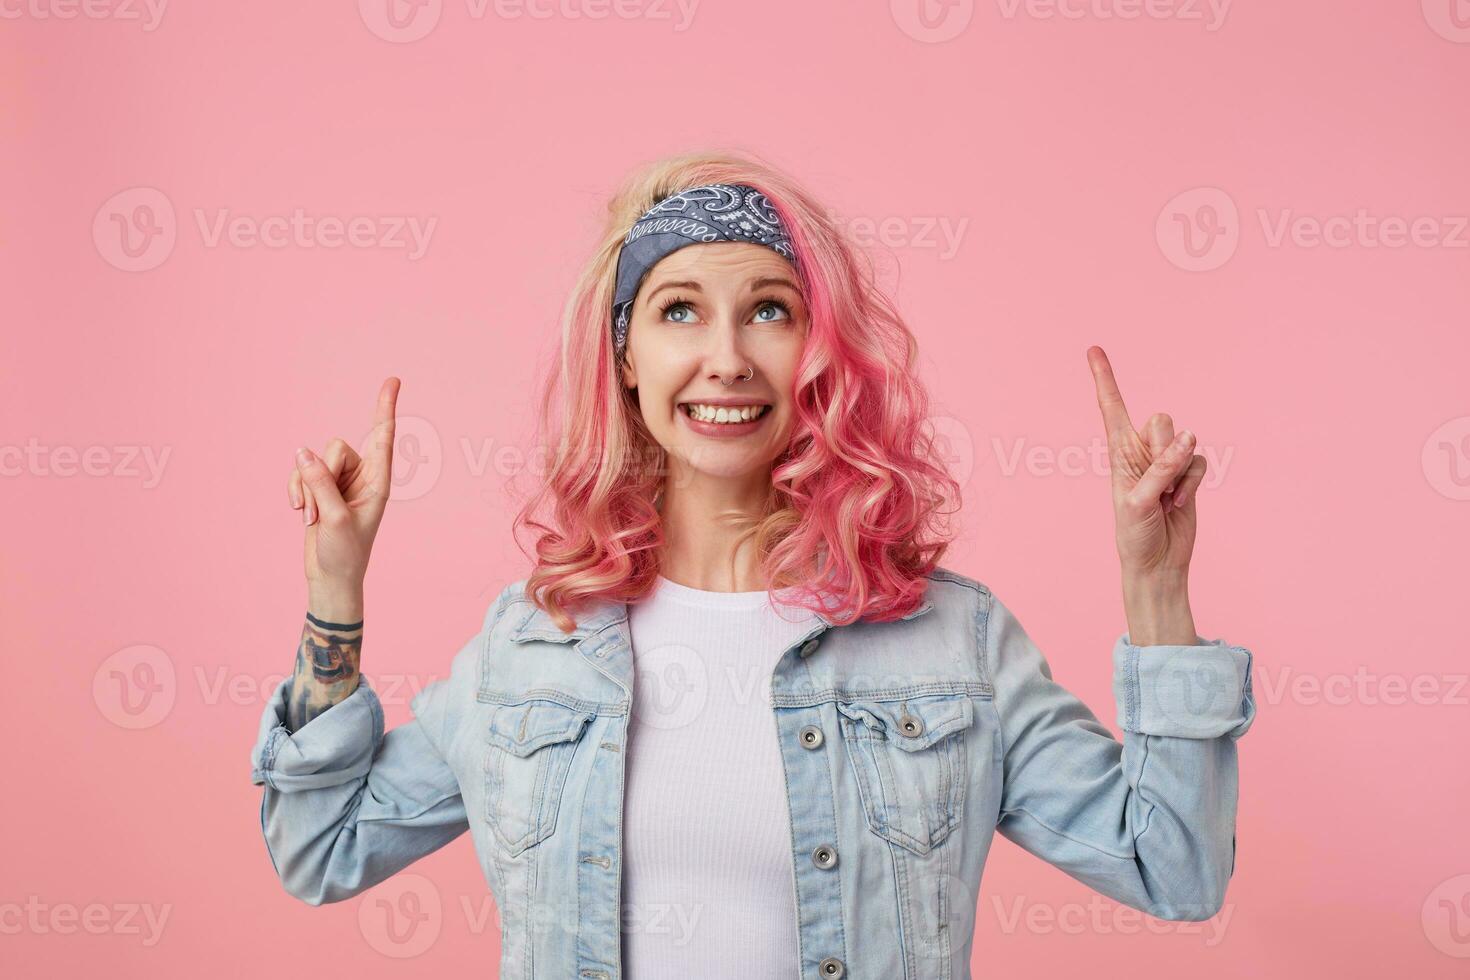 Happy cute smiling lady with pink hair and tattooed hands, standing over pink background, wearing a white t-shirt and denim jacket. looks up and points fingers at copy space above her head. photo